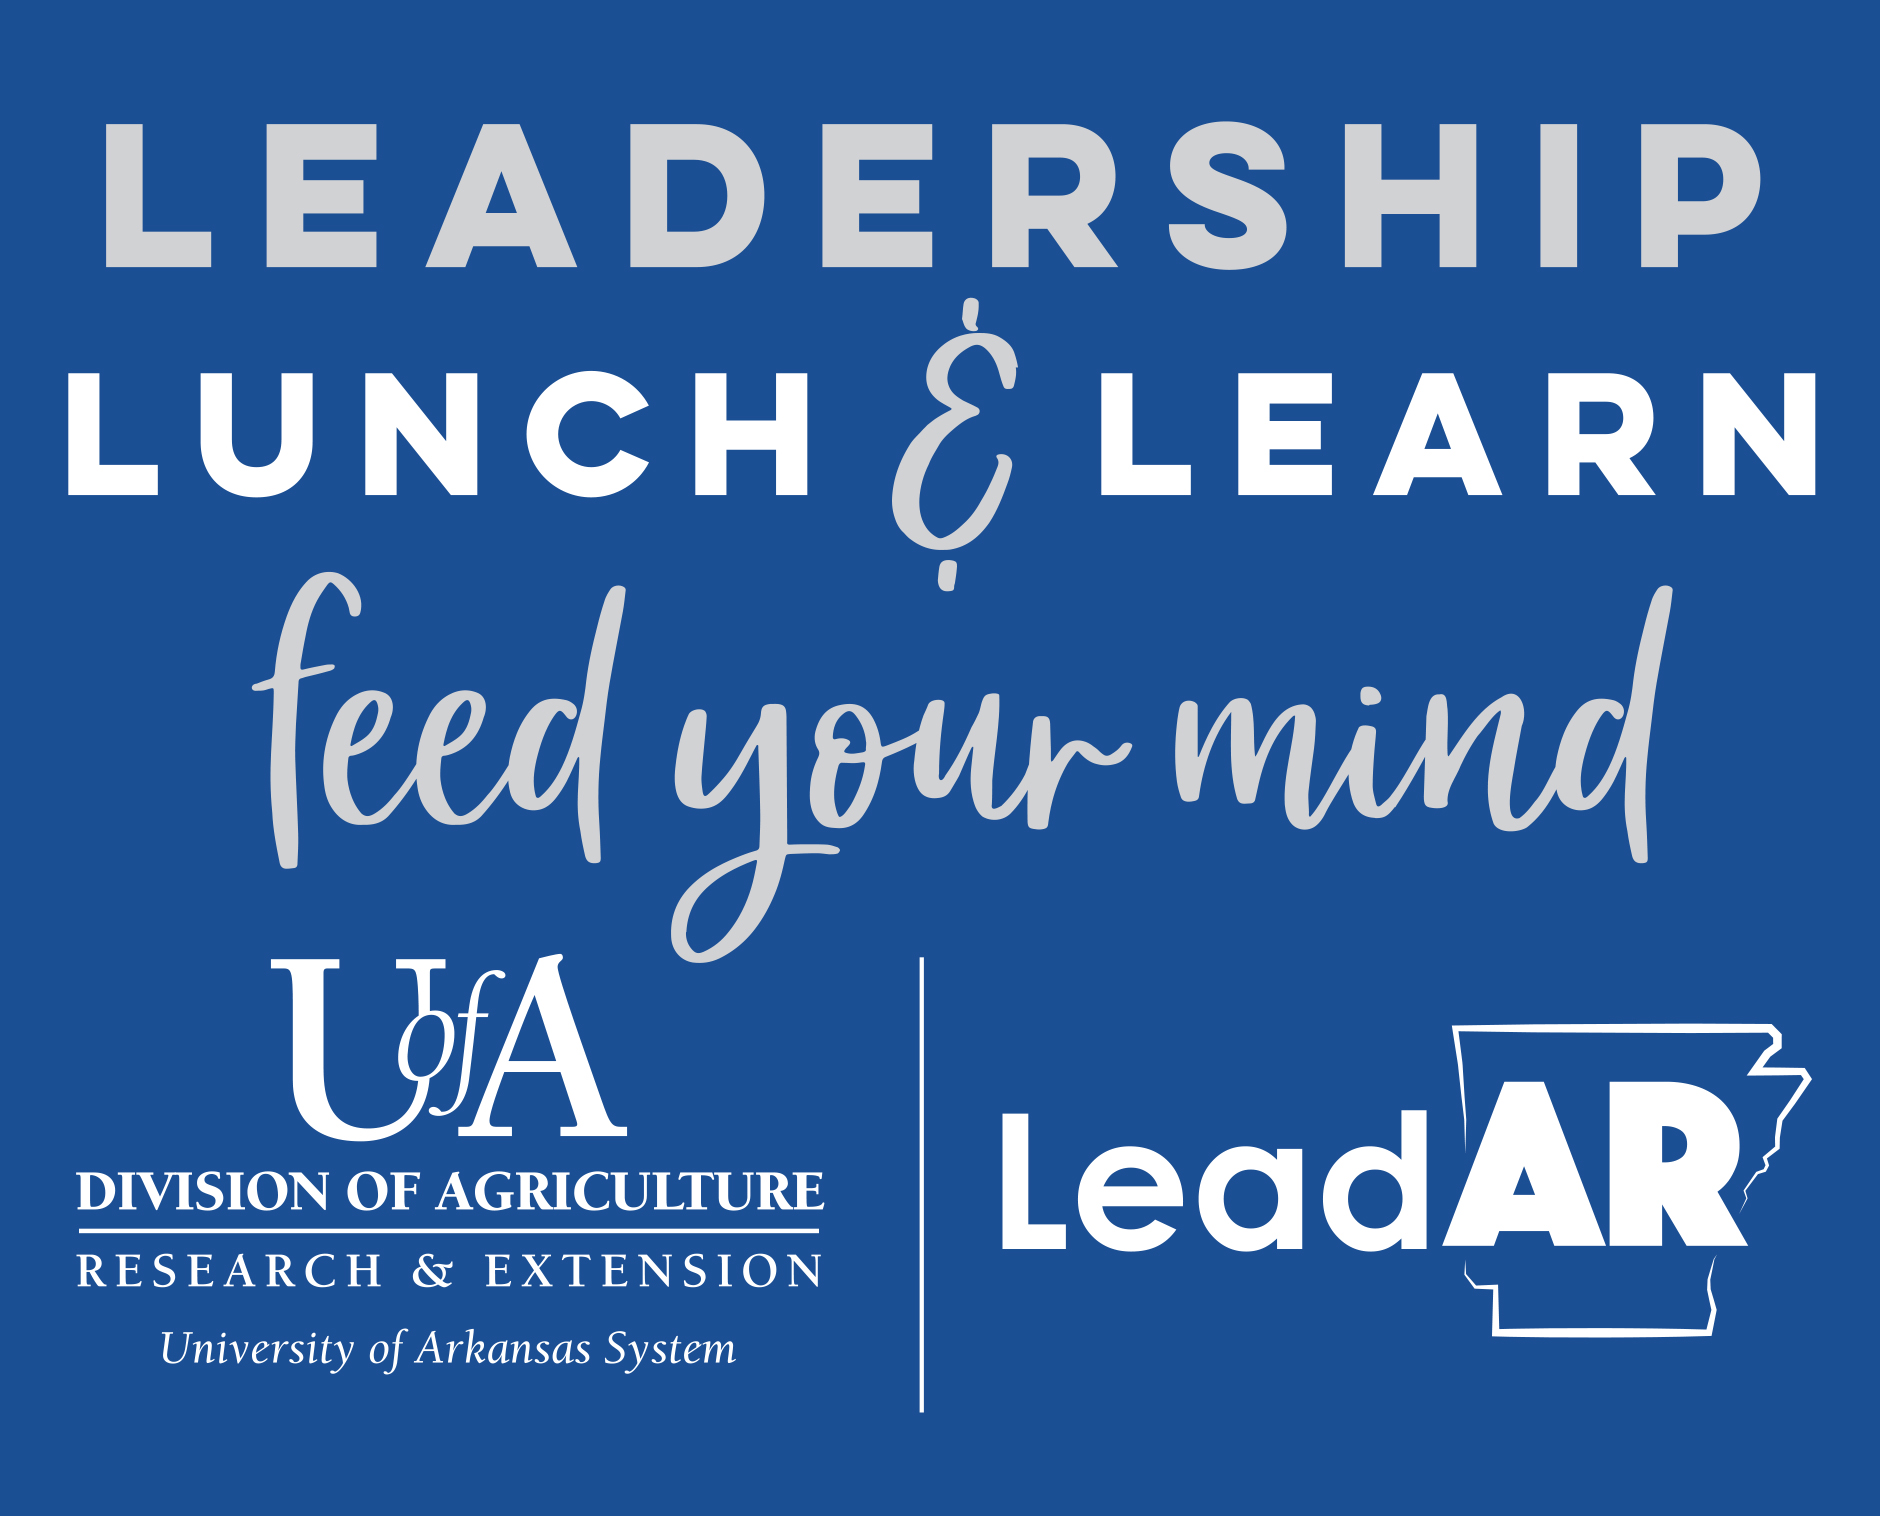 Lunch and Learn Graphic